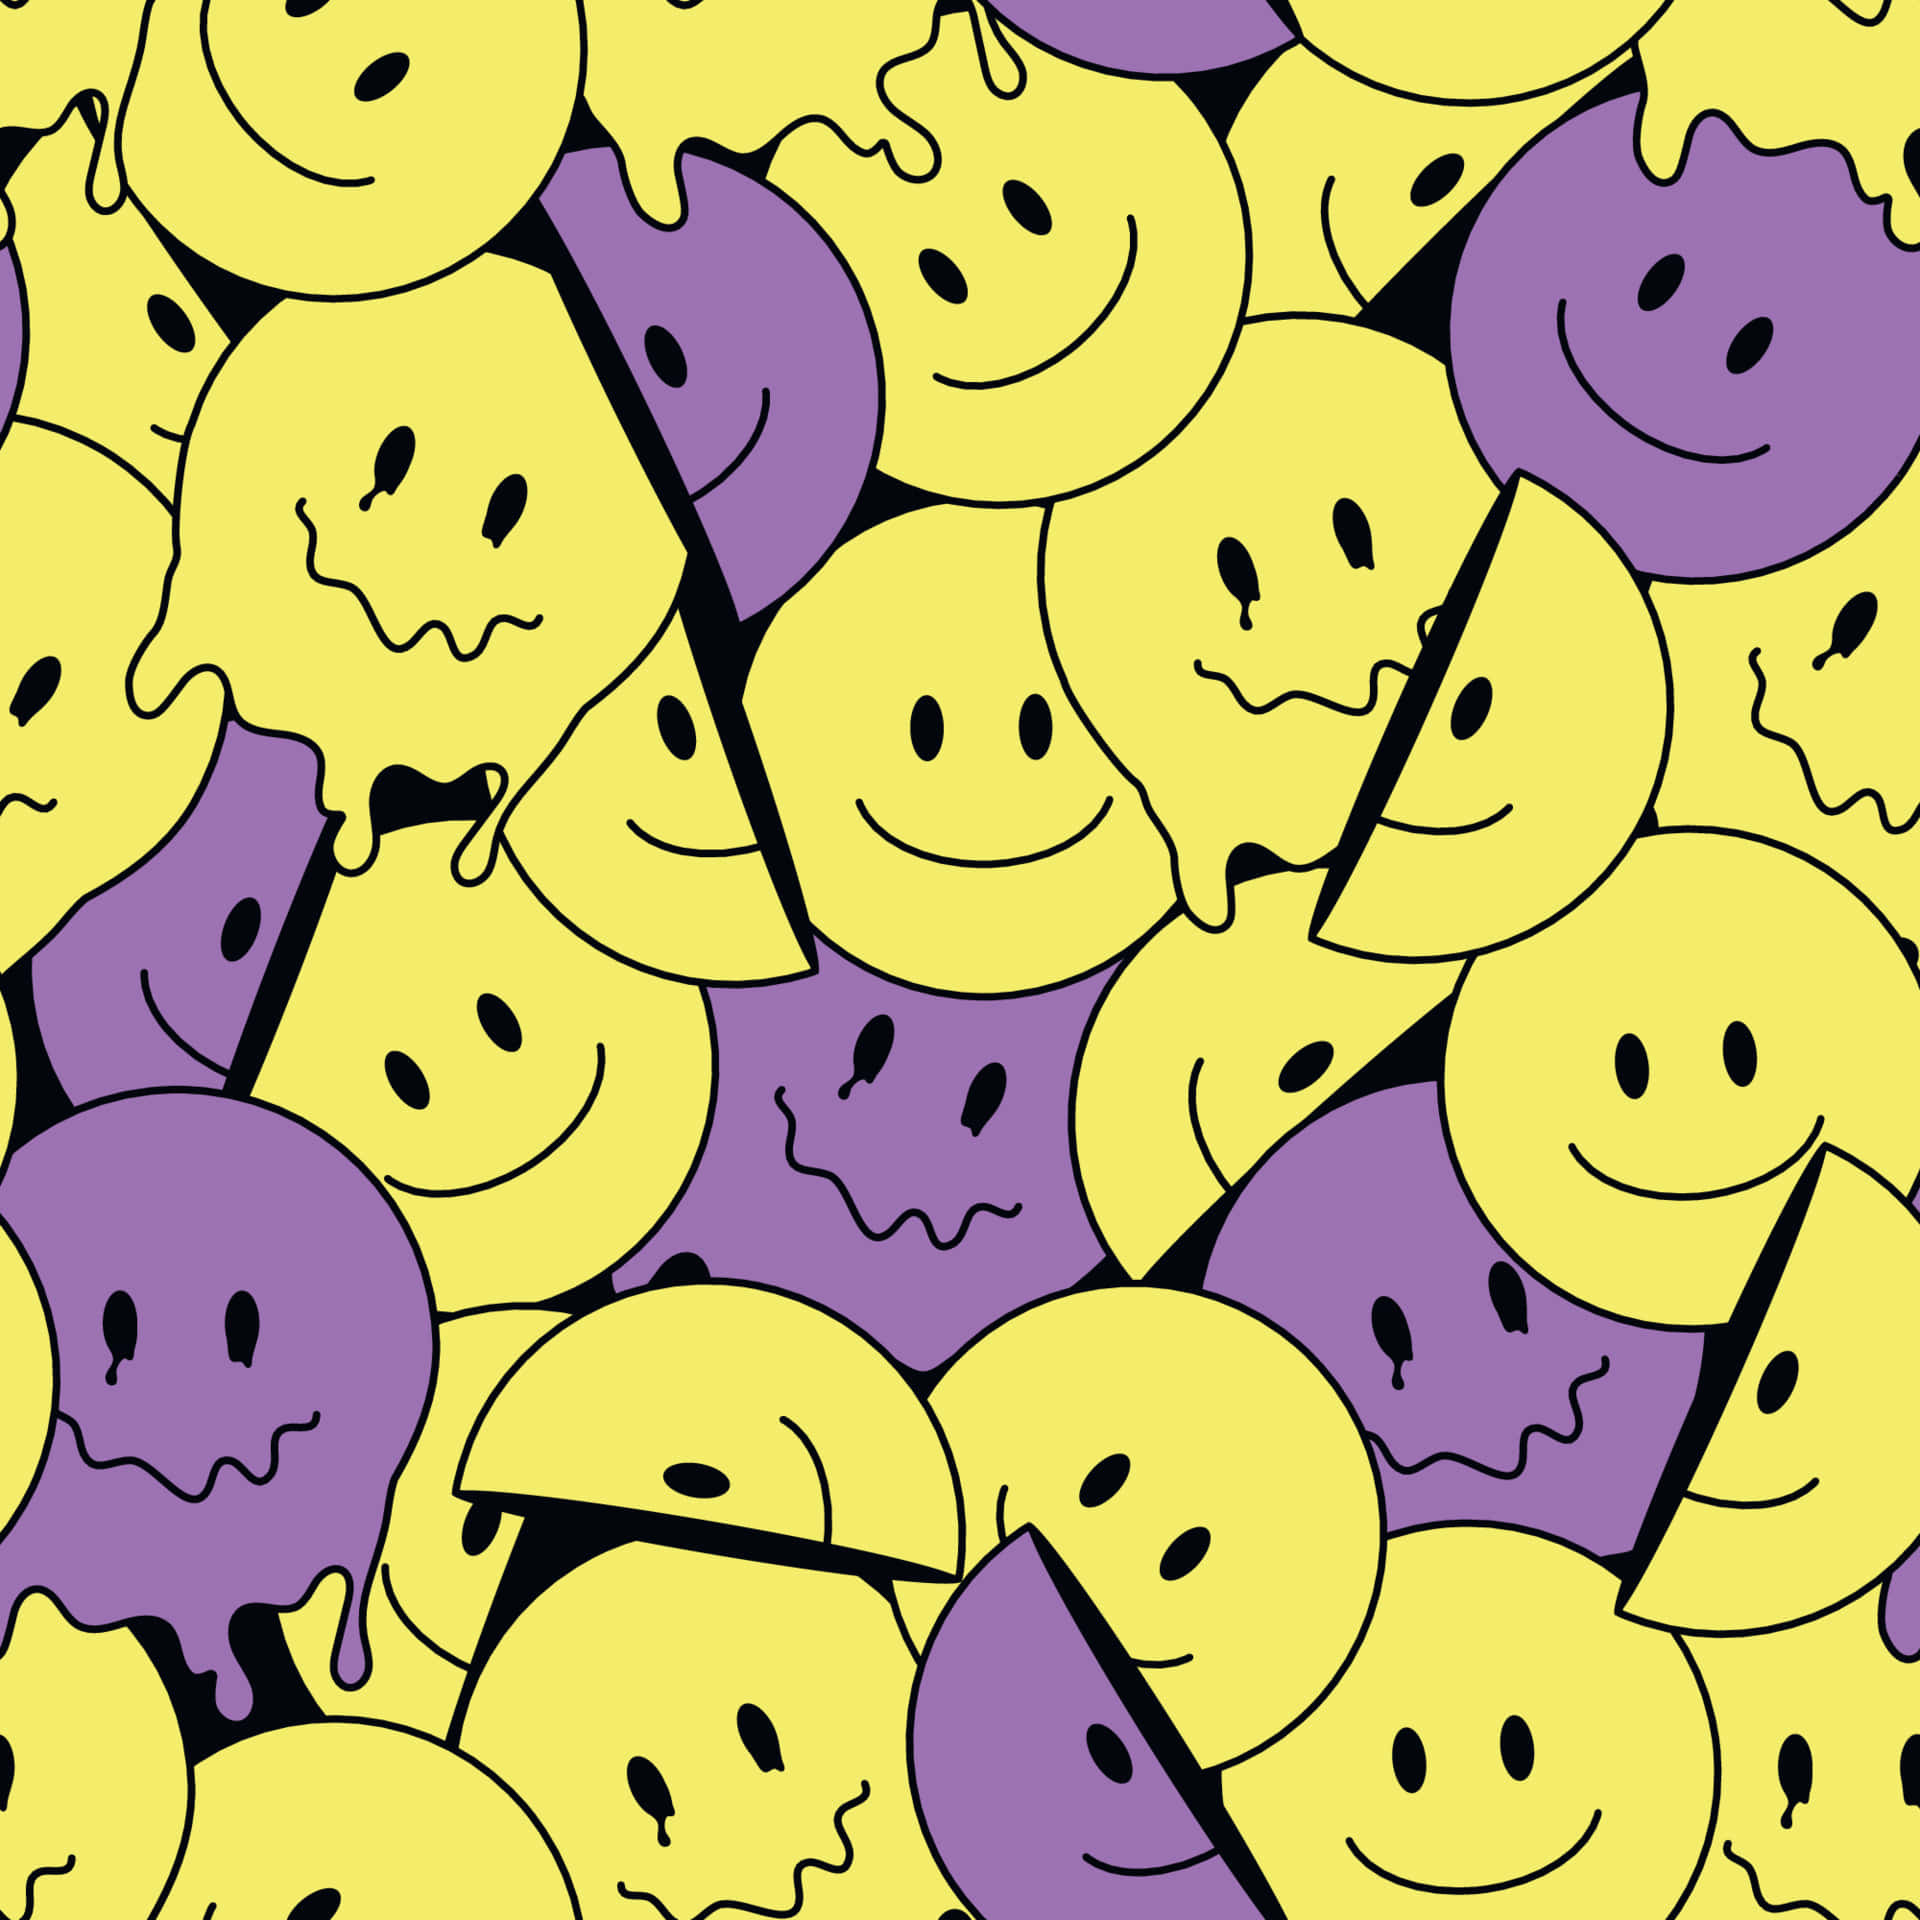 Pastel Purple Dripping Smiley in 2022  Drip smiley face wallpaper Purple  wallpaper Sm  Drip smiley face wallpaper Preppy aesthetic wallpaper Purple  wallpaper